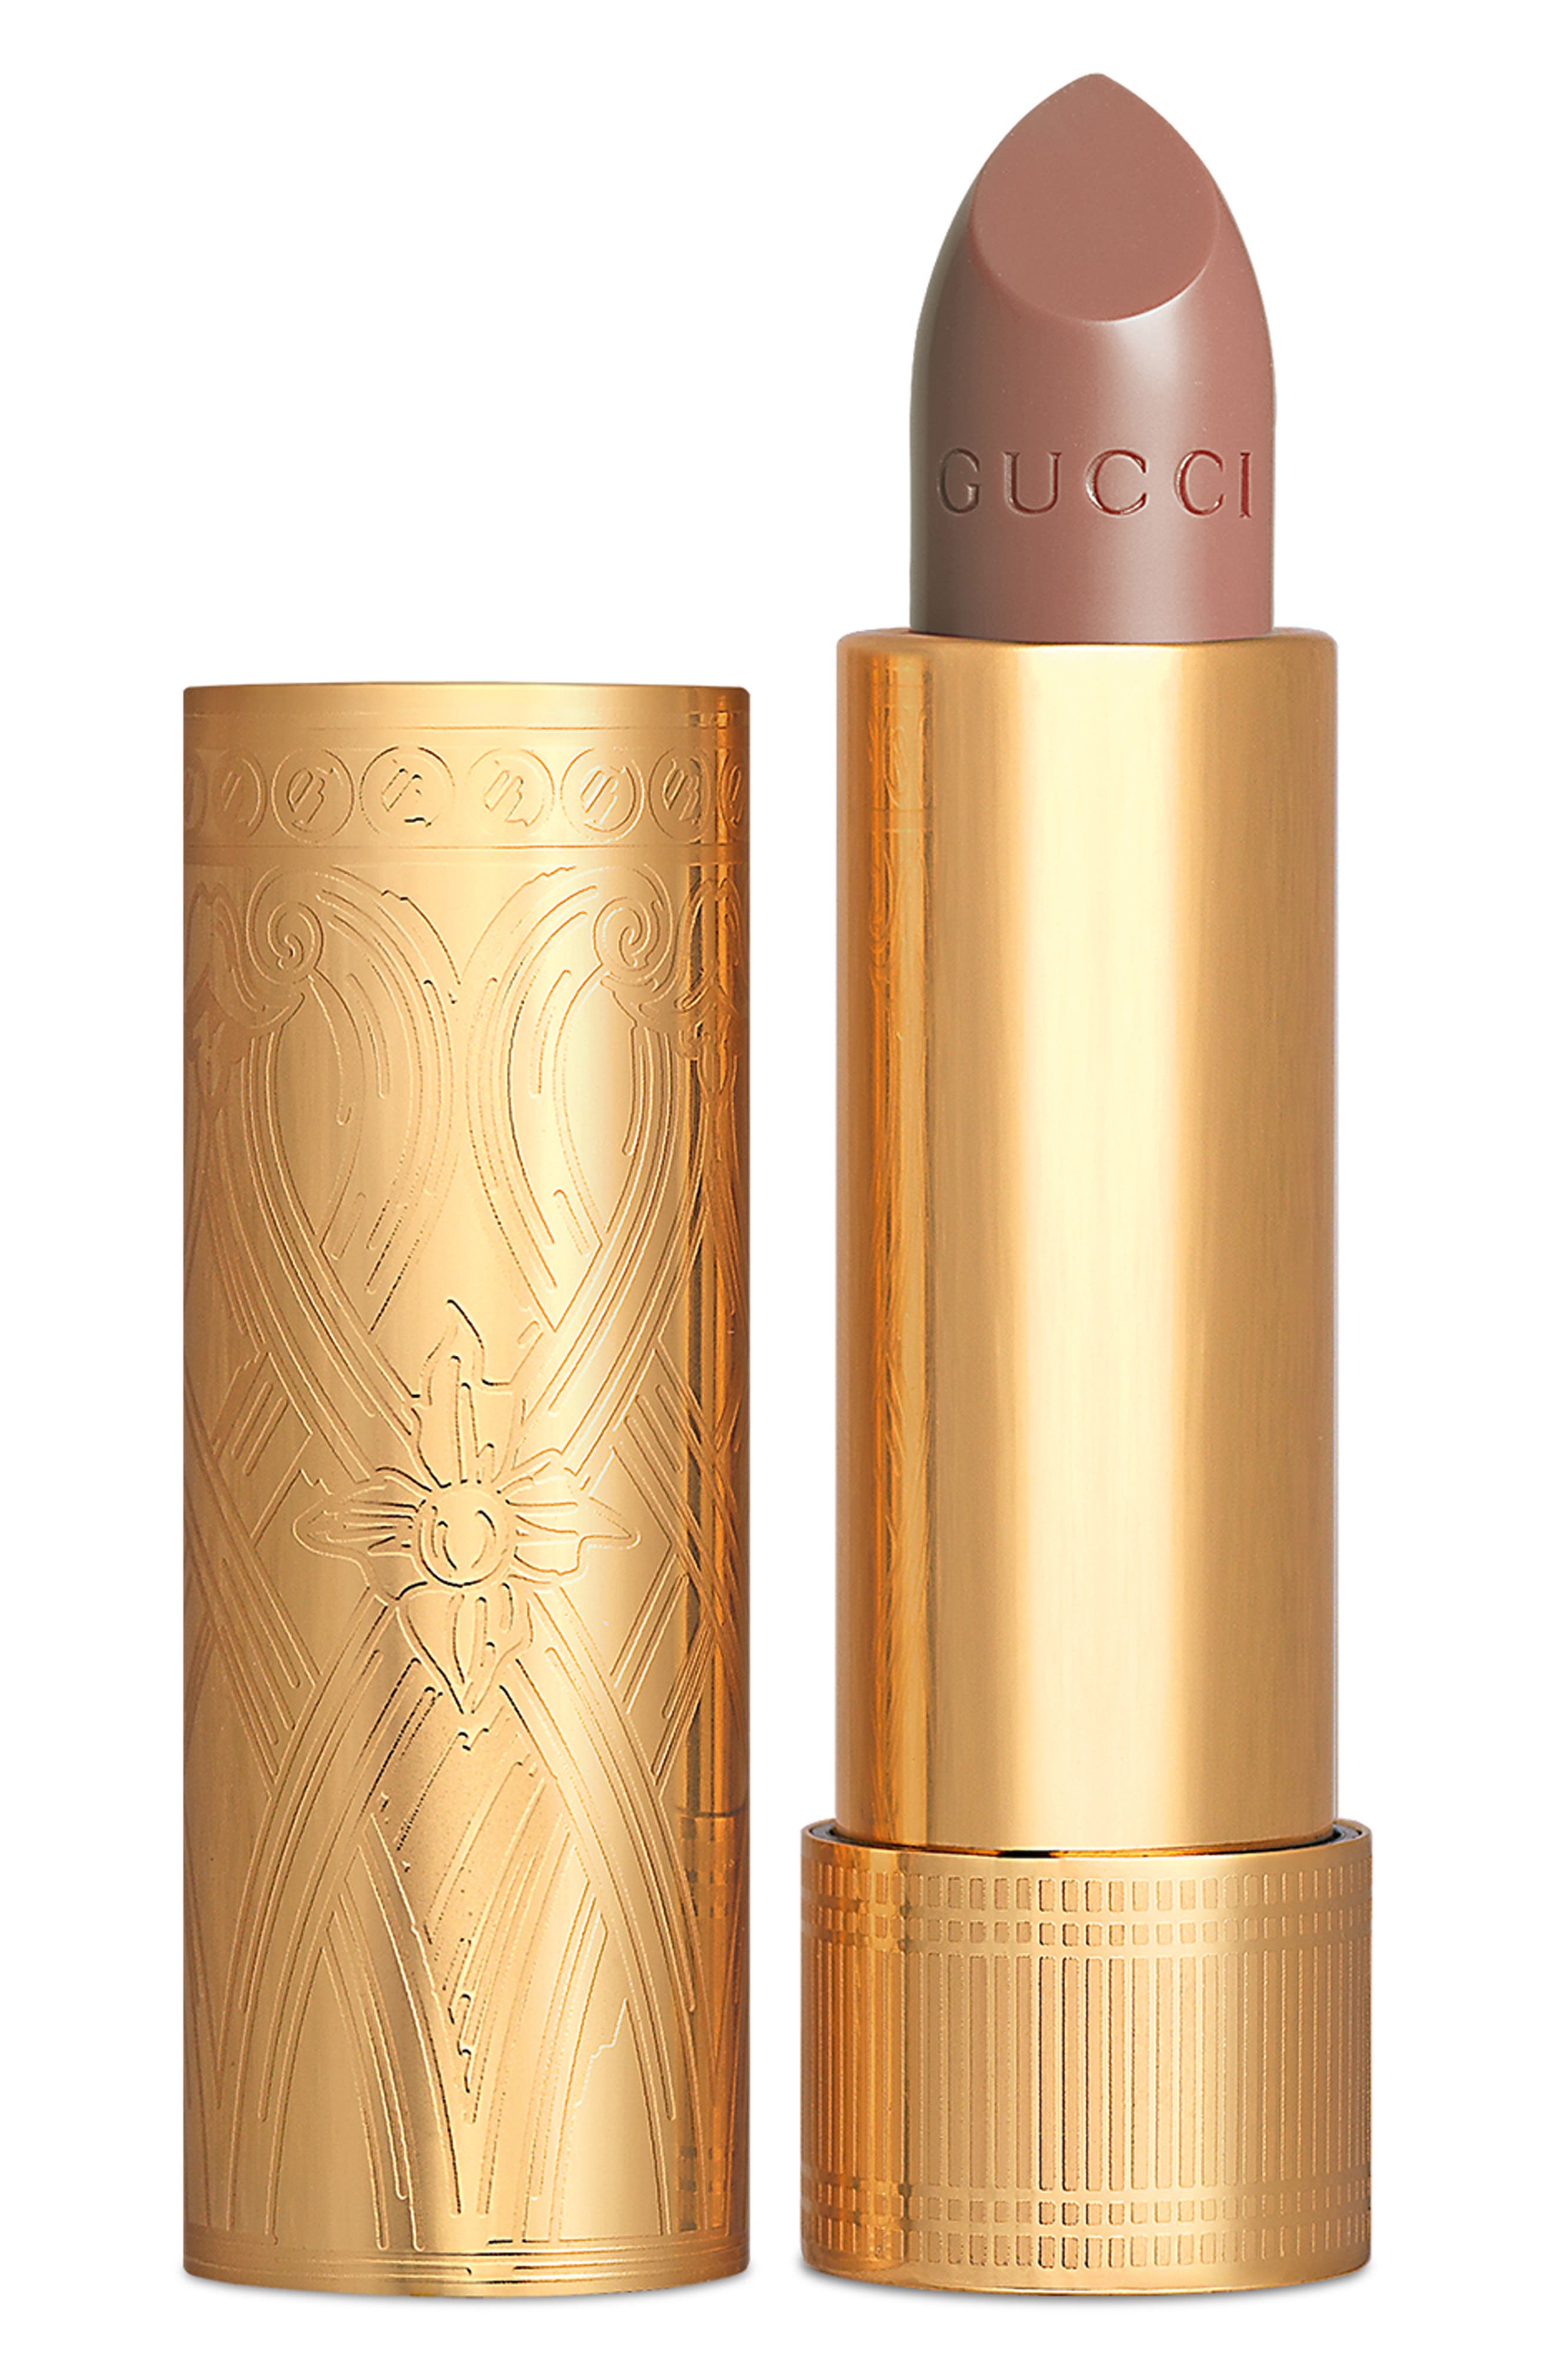 Gucci Rouge a Levres Satin Lipstick in Peggy Taupe at Nordstrom